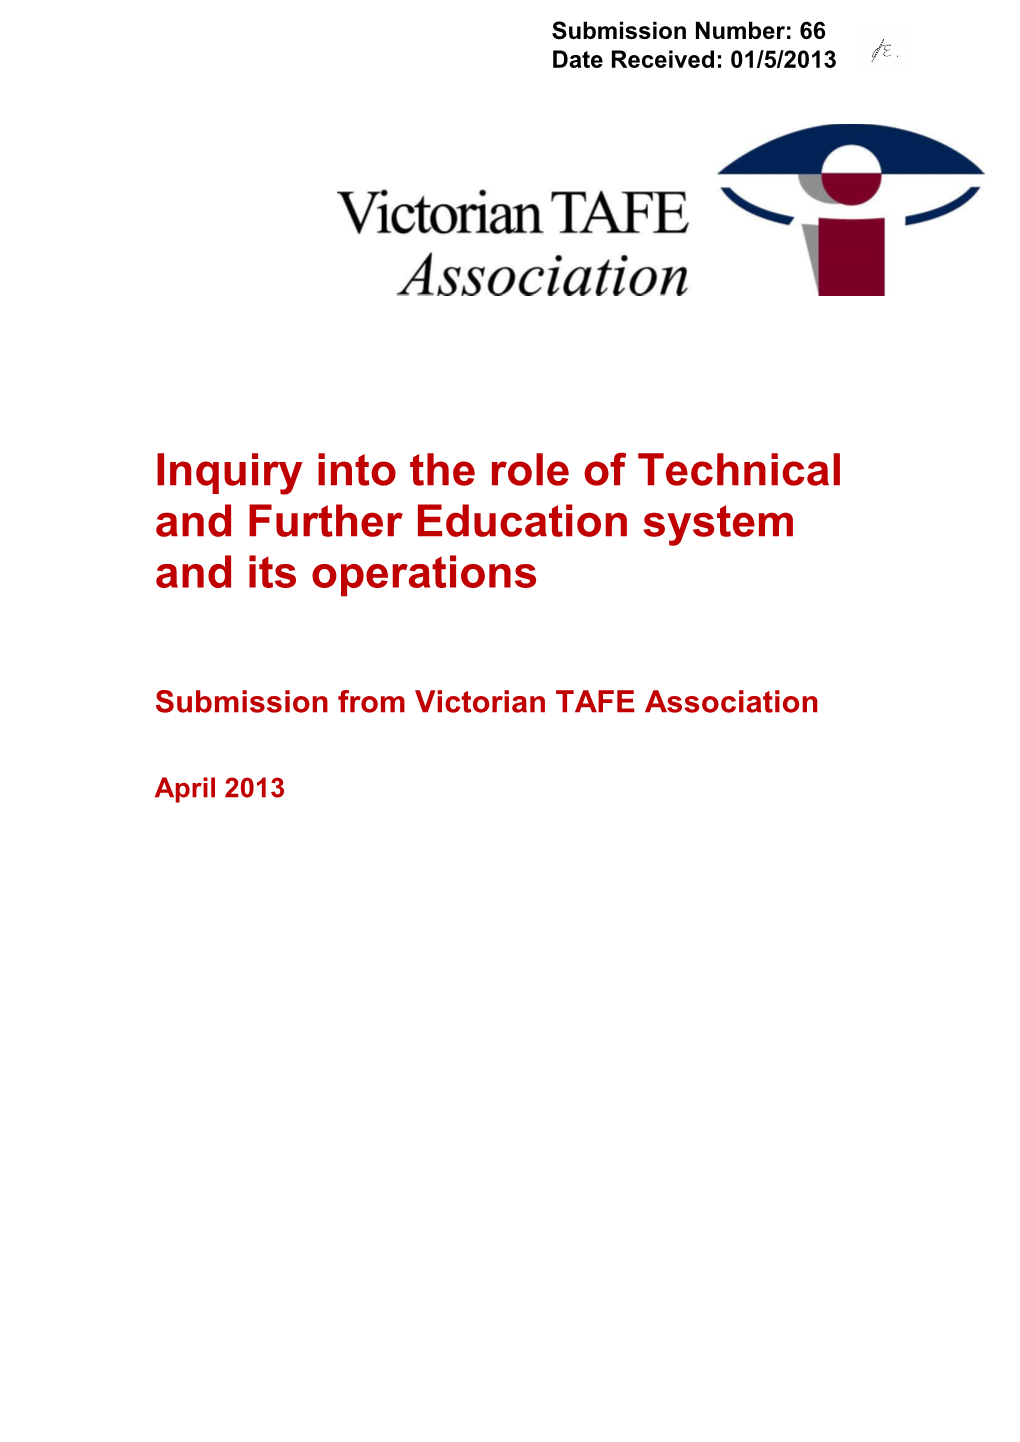 Inquiry Into the Role of Technical and Further Education System and Its Operations